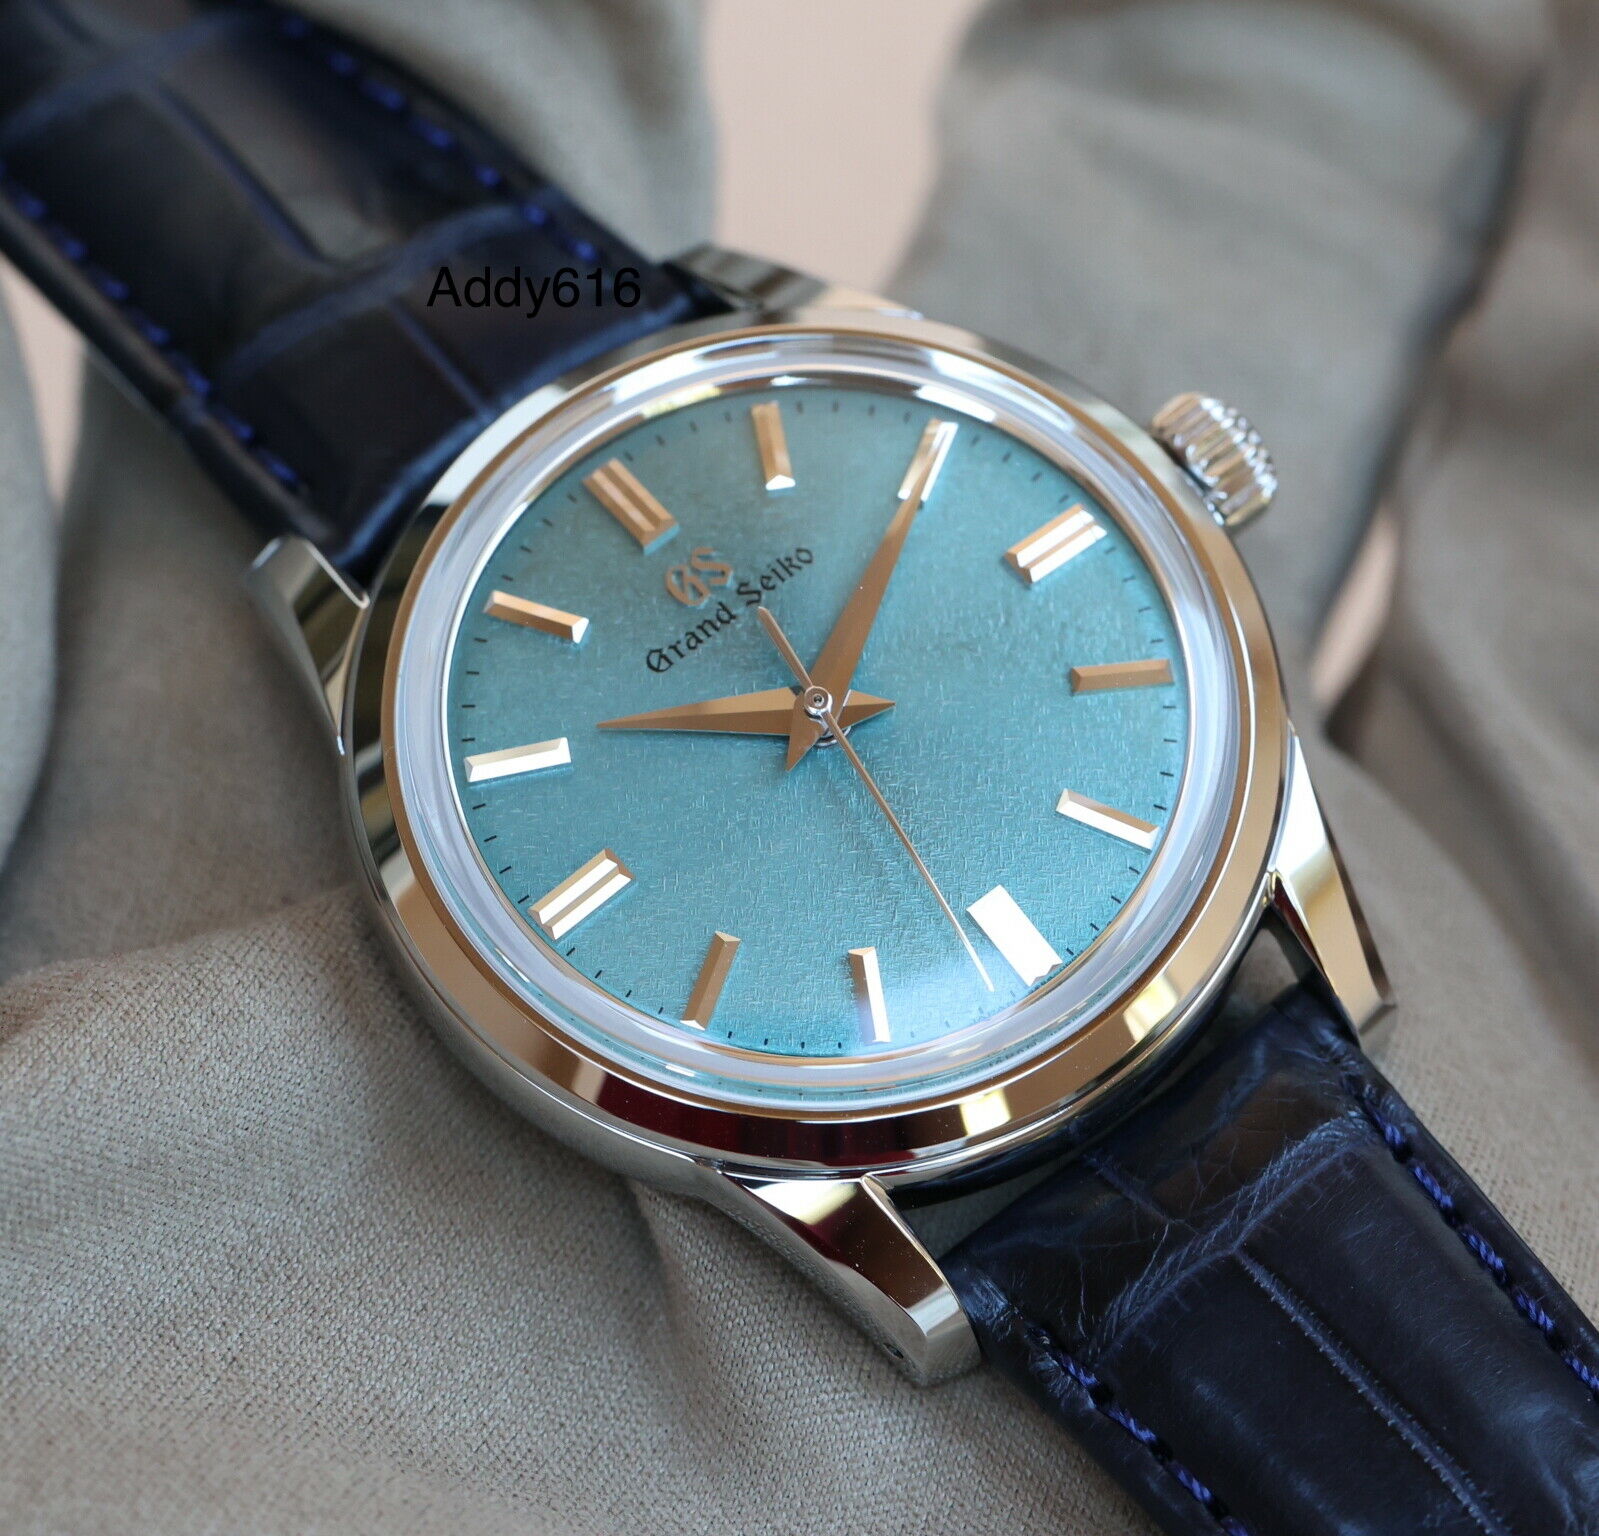 Grand Seiko SBGW275 US Limited Edition | WatchCharts